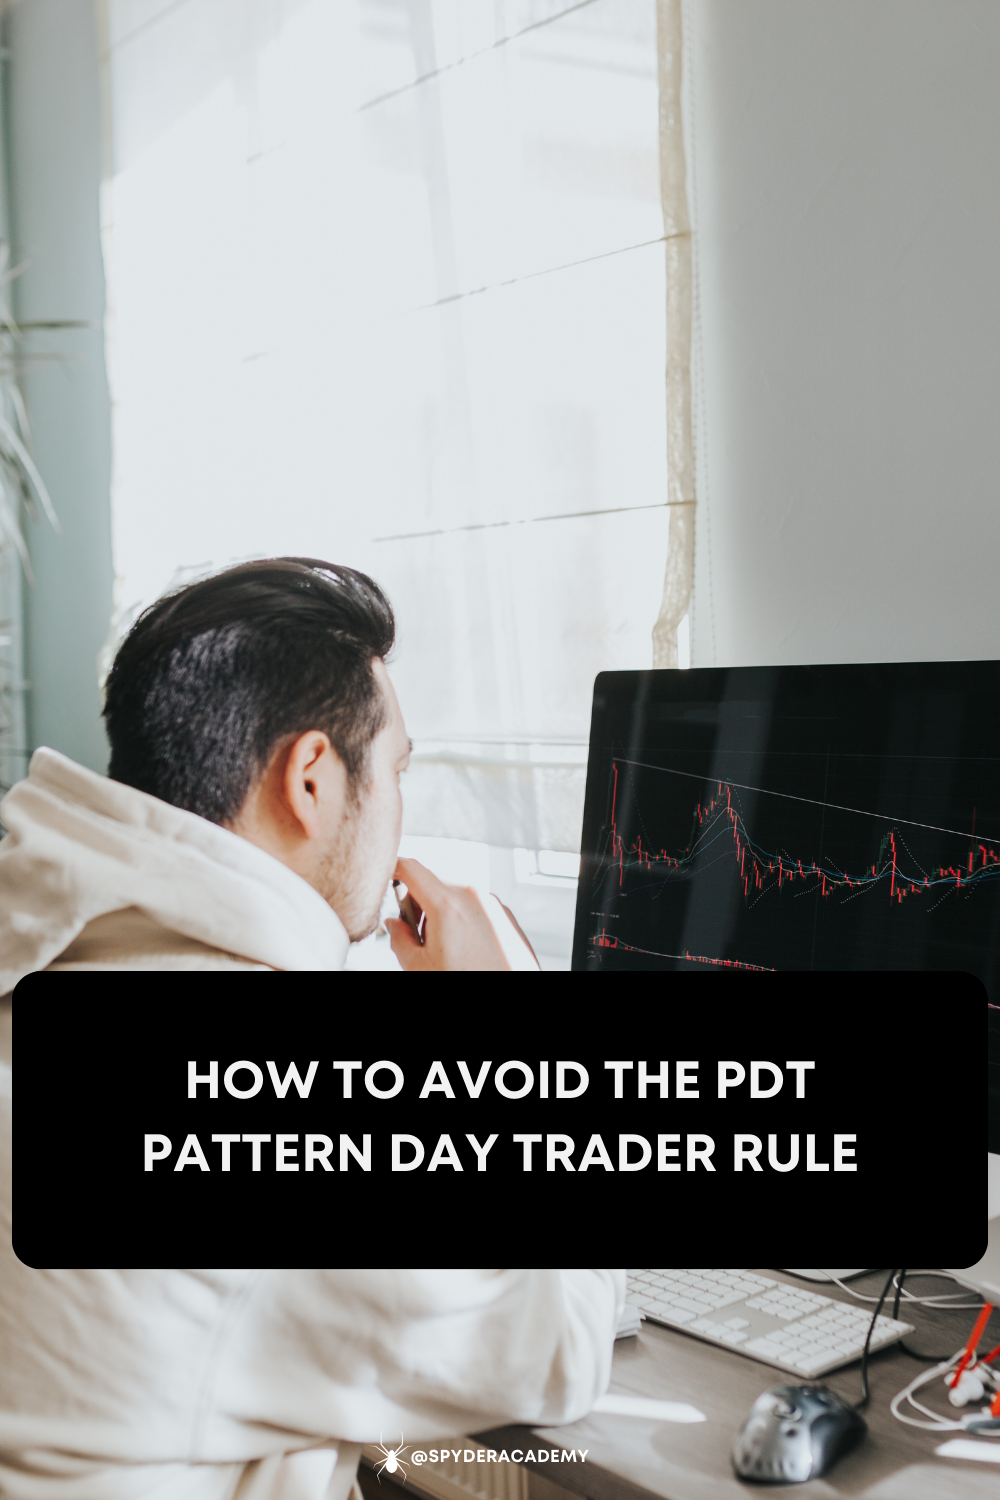 Discover the rules, positives, and negatives of PDT, and learn strategic ways to sidestep it. Uncover insights tailored for new traders seeking to navigate the complexities of day trading while avoiding regulatory restrictions.